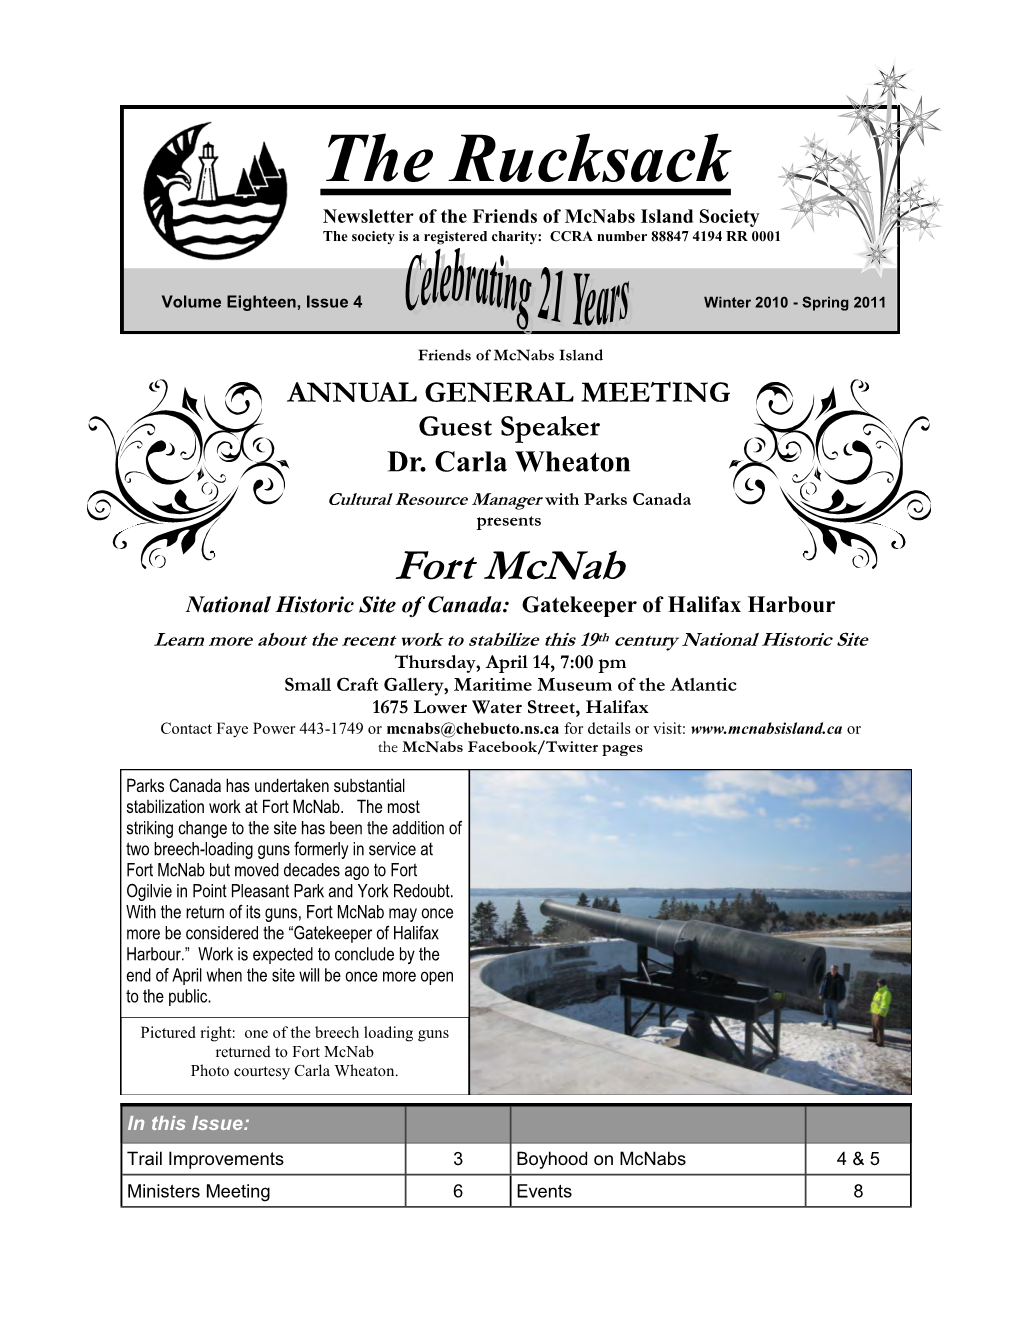 The Rucksack Newsletter of the Friends of Mcnabs Island Society the Society Is a Registered Charity: CCRA Number 88847 4194 RR 0001